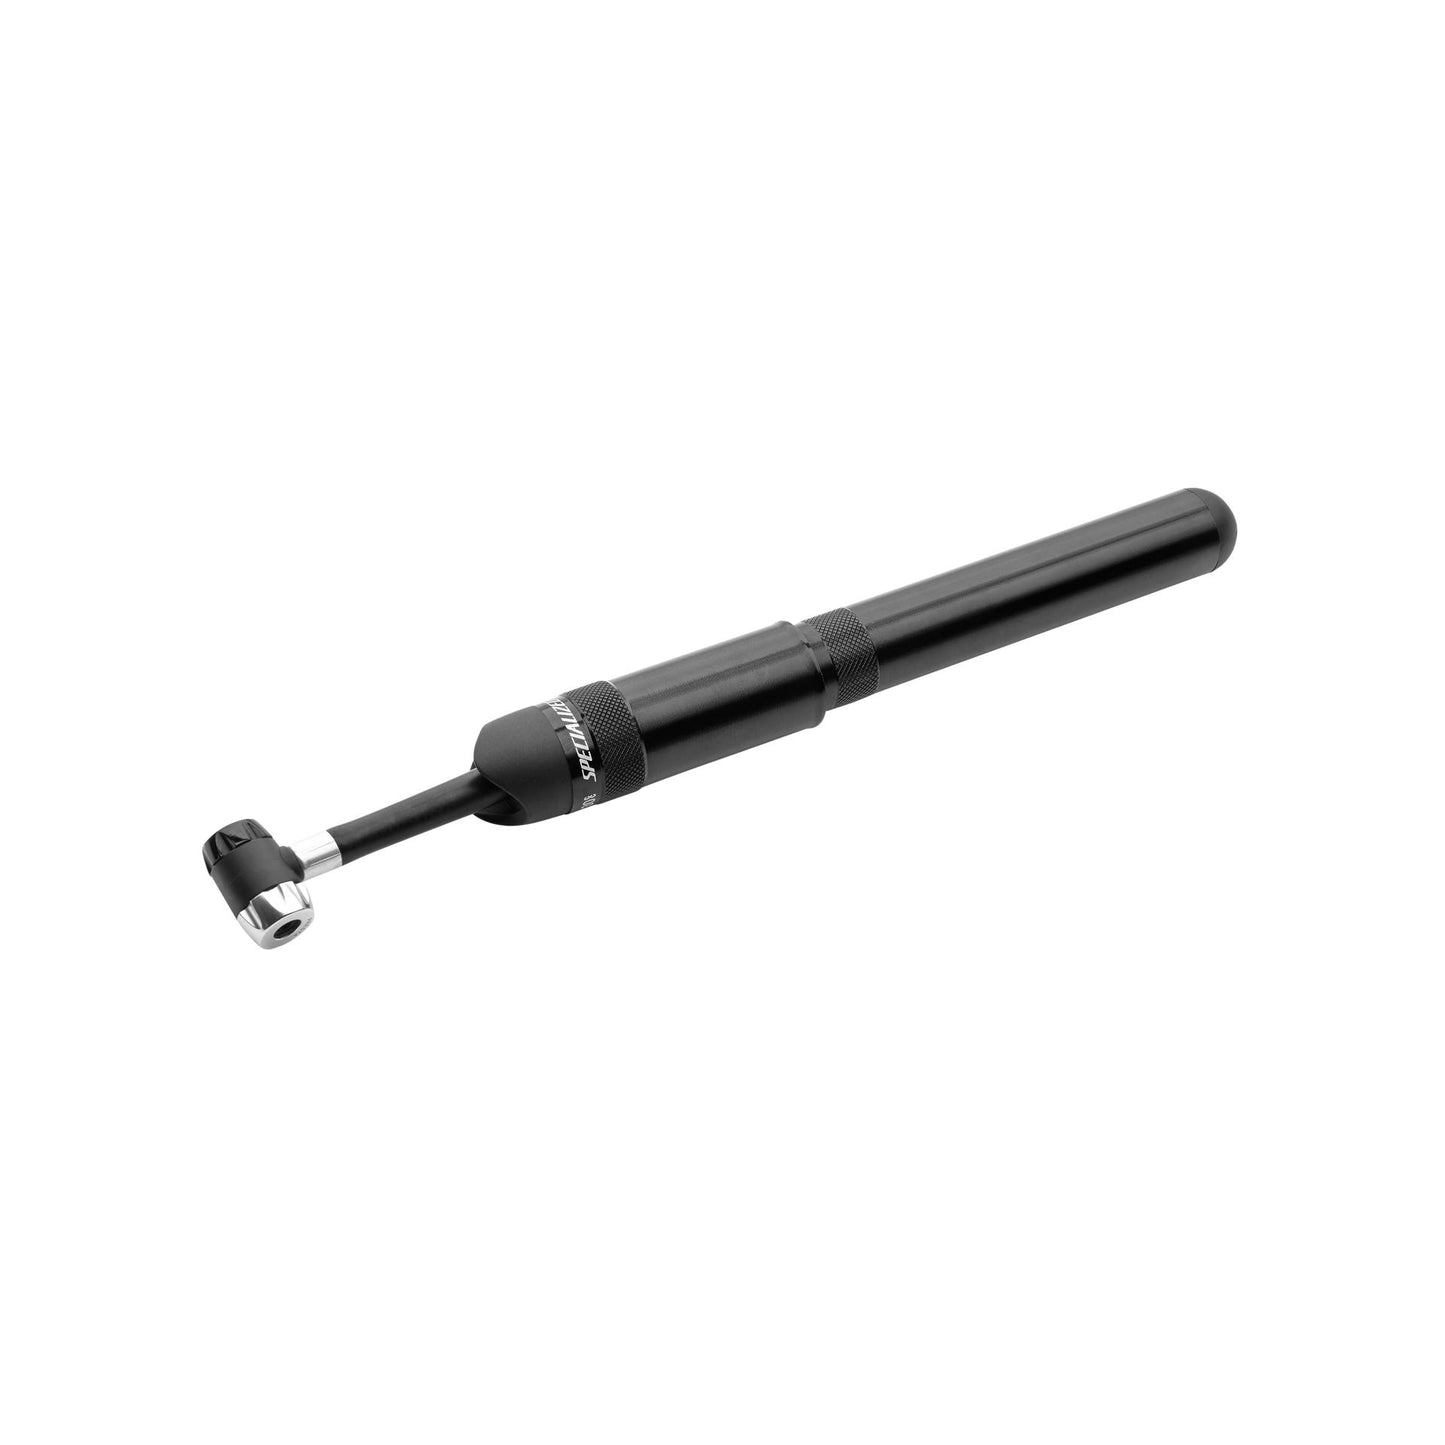 Specialized Air Tool Flex Bike Pump - Pumps - Bicycle Warehouse